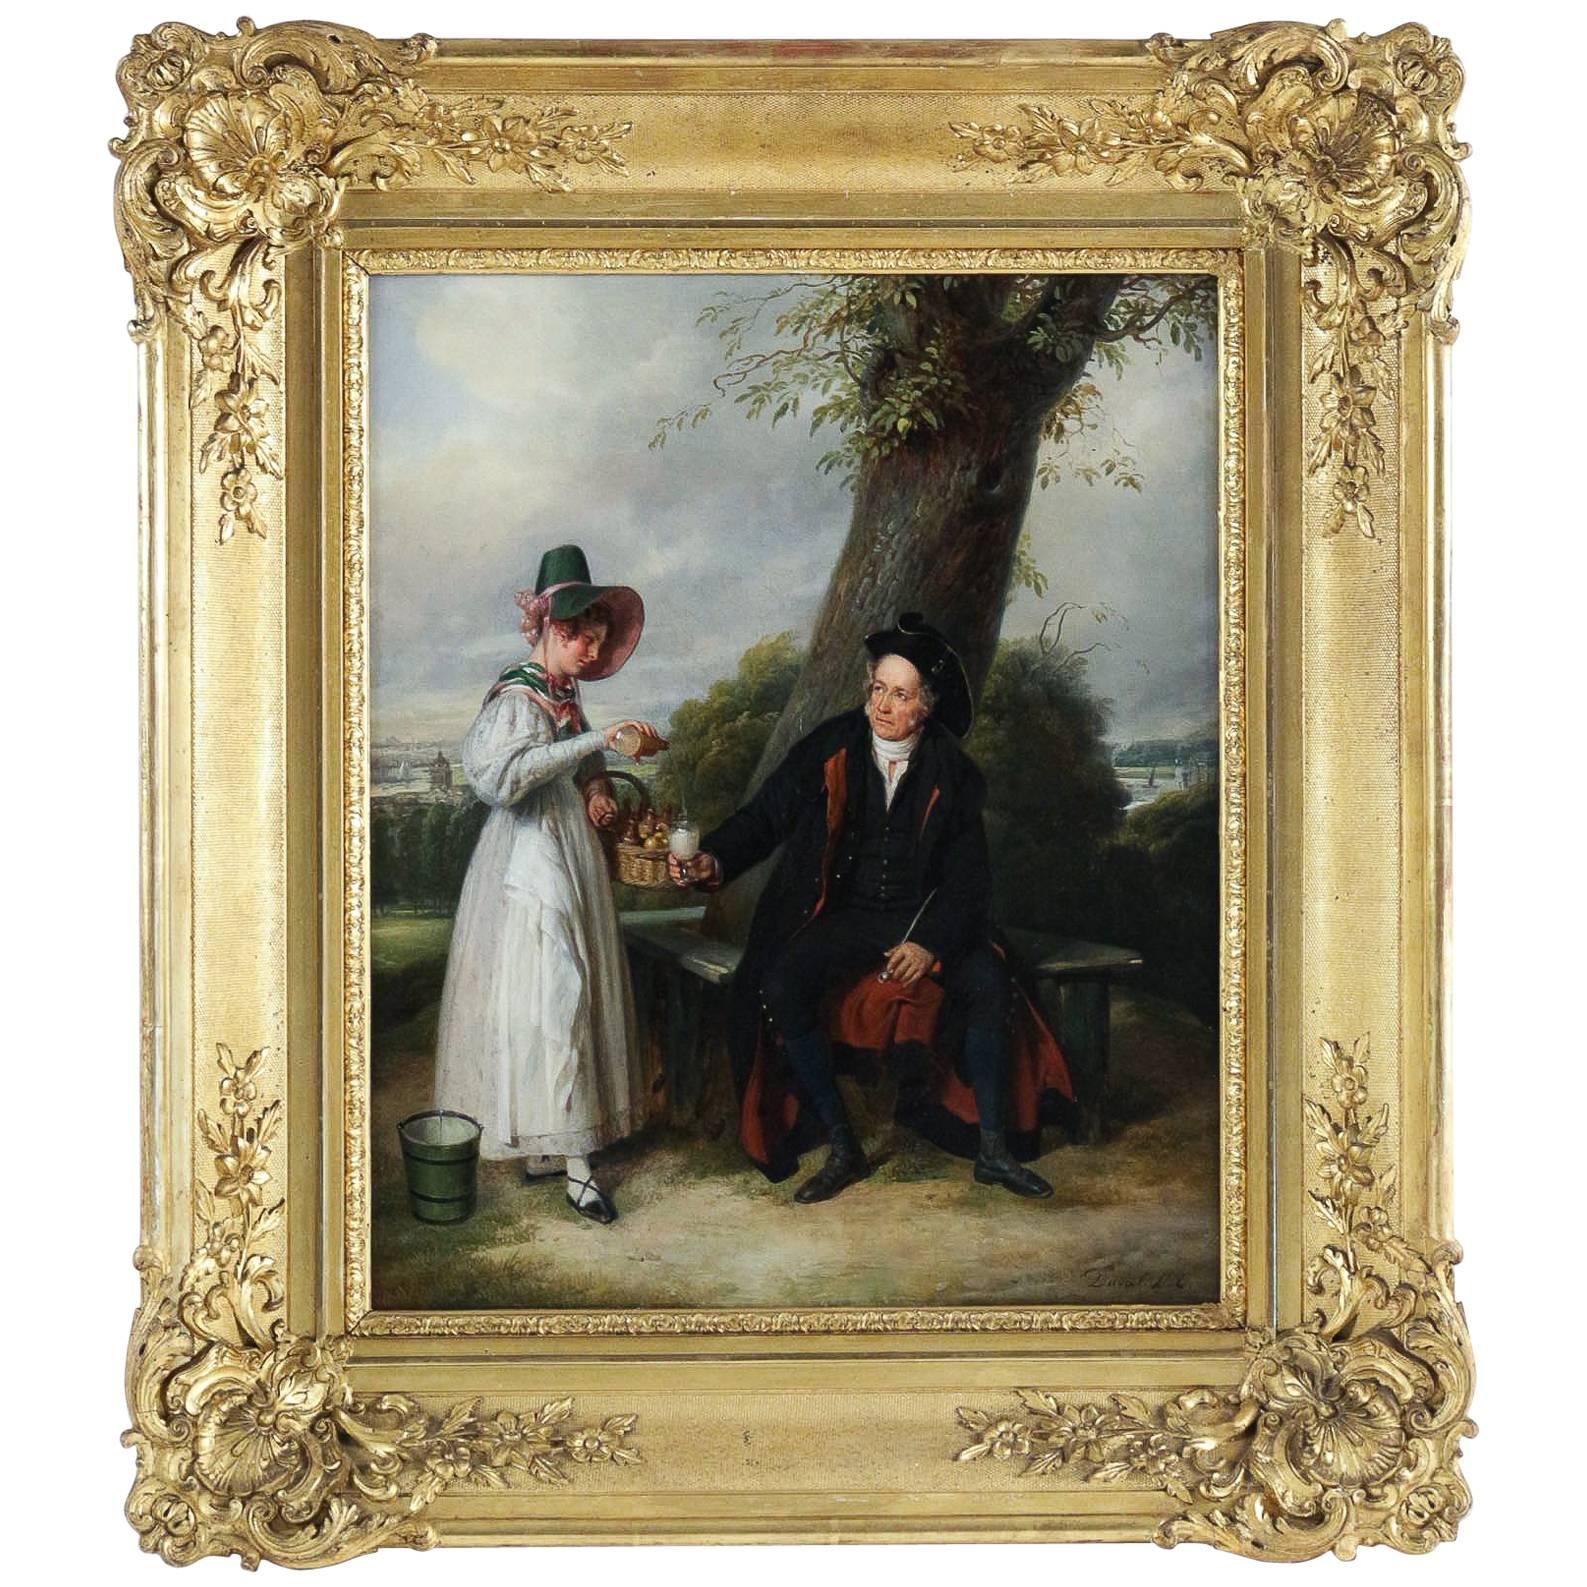 Duval le Camus Pierre French Romantic Period Oil on Canvas Father and Daughter